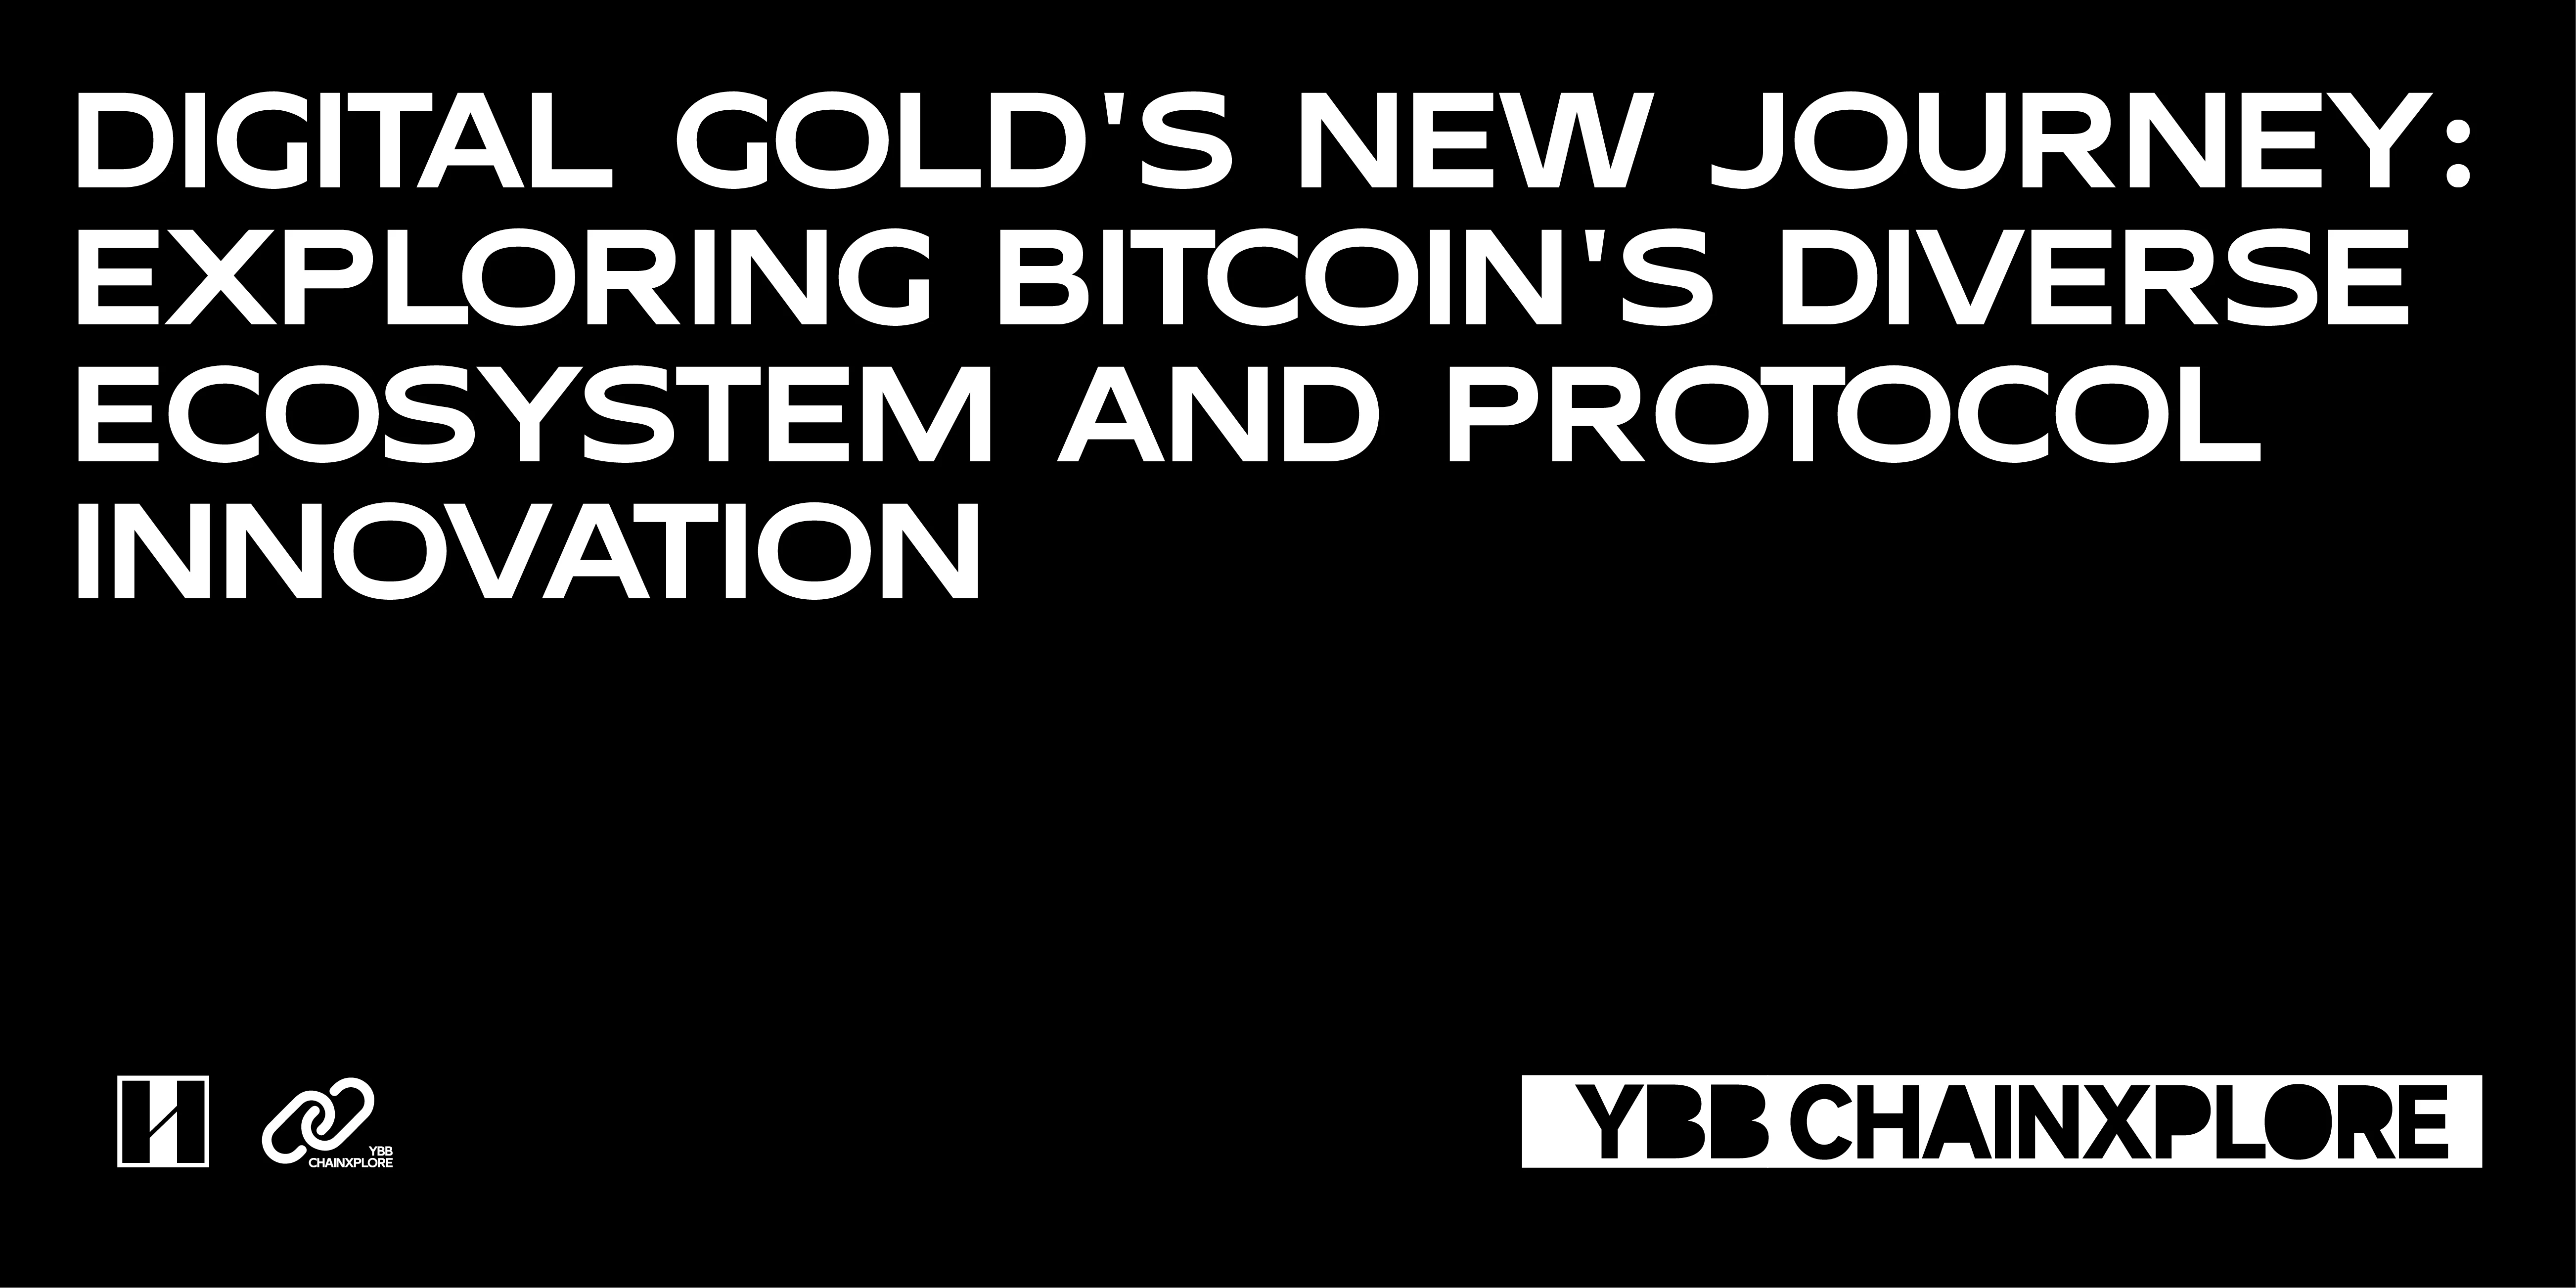 YBB Capital: A new journey for digital gold, Bitcoin ecological diversification exploration and protocol innovation